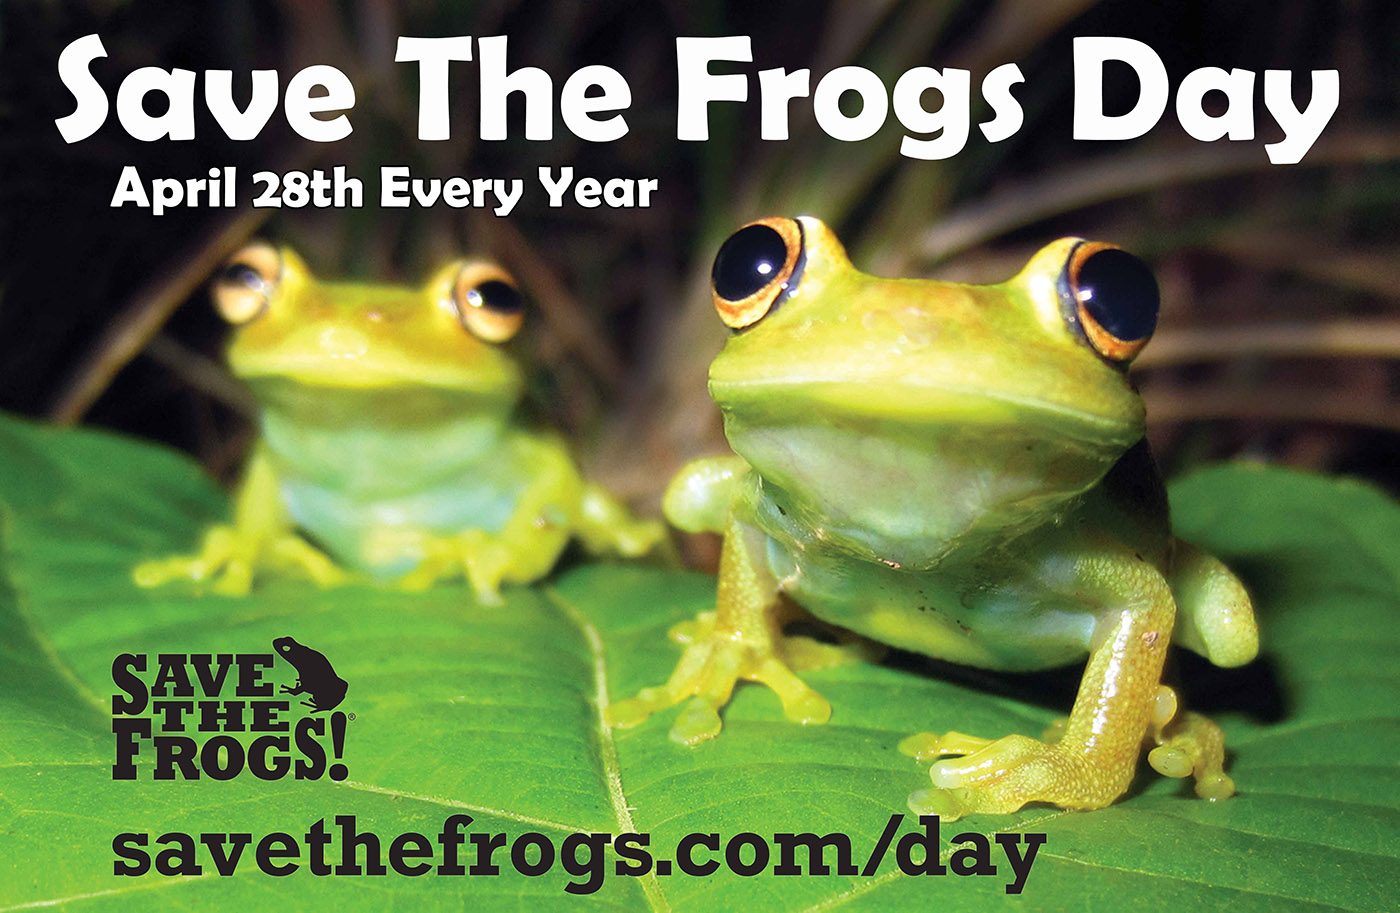 Save The Frogs Day - April 28th Every Year